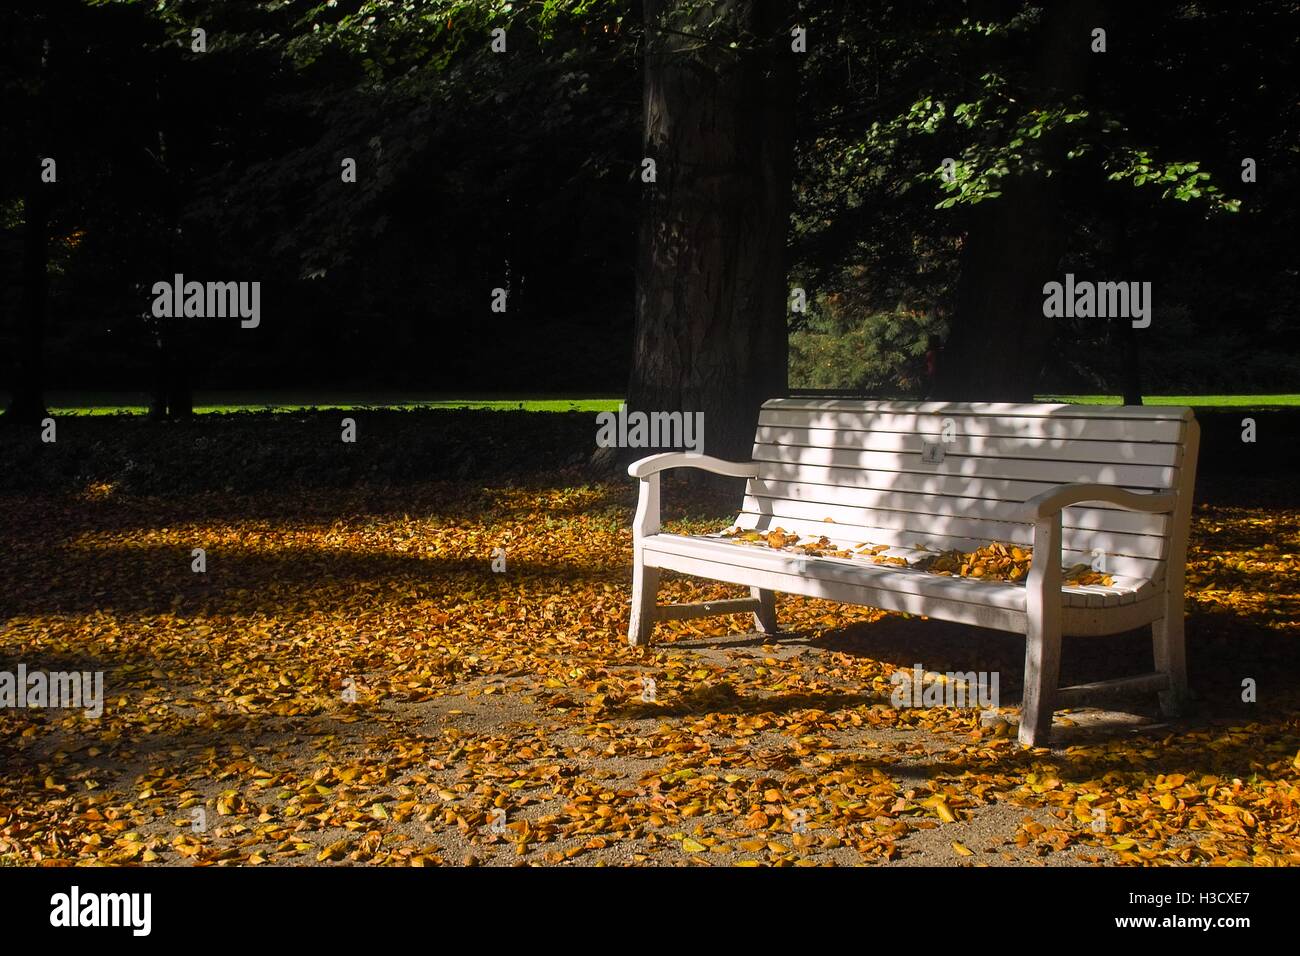 Romantic park view in autumn. Fallen leaves and a white wooden bench in sunlight Stock Photo